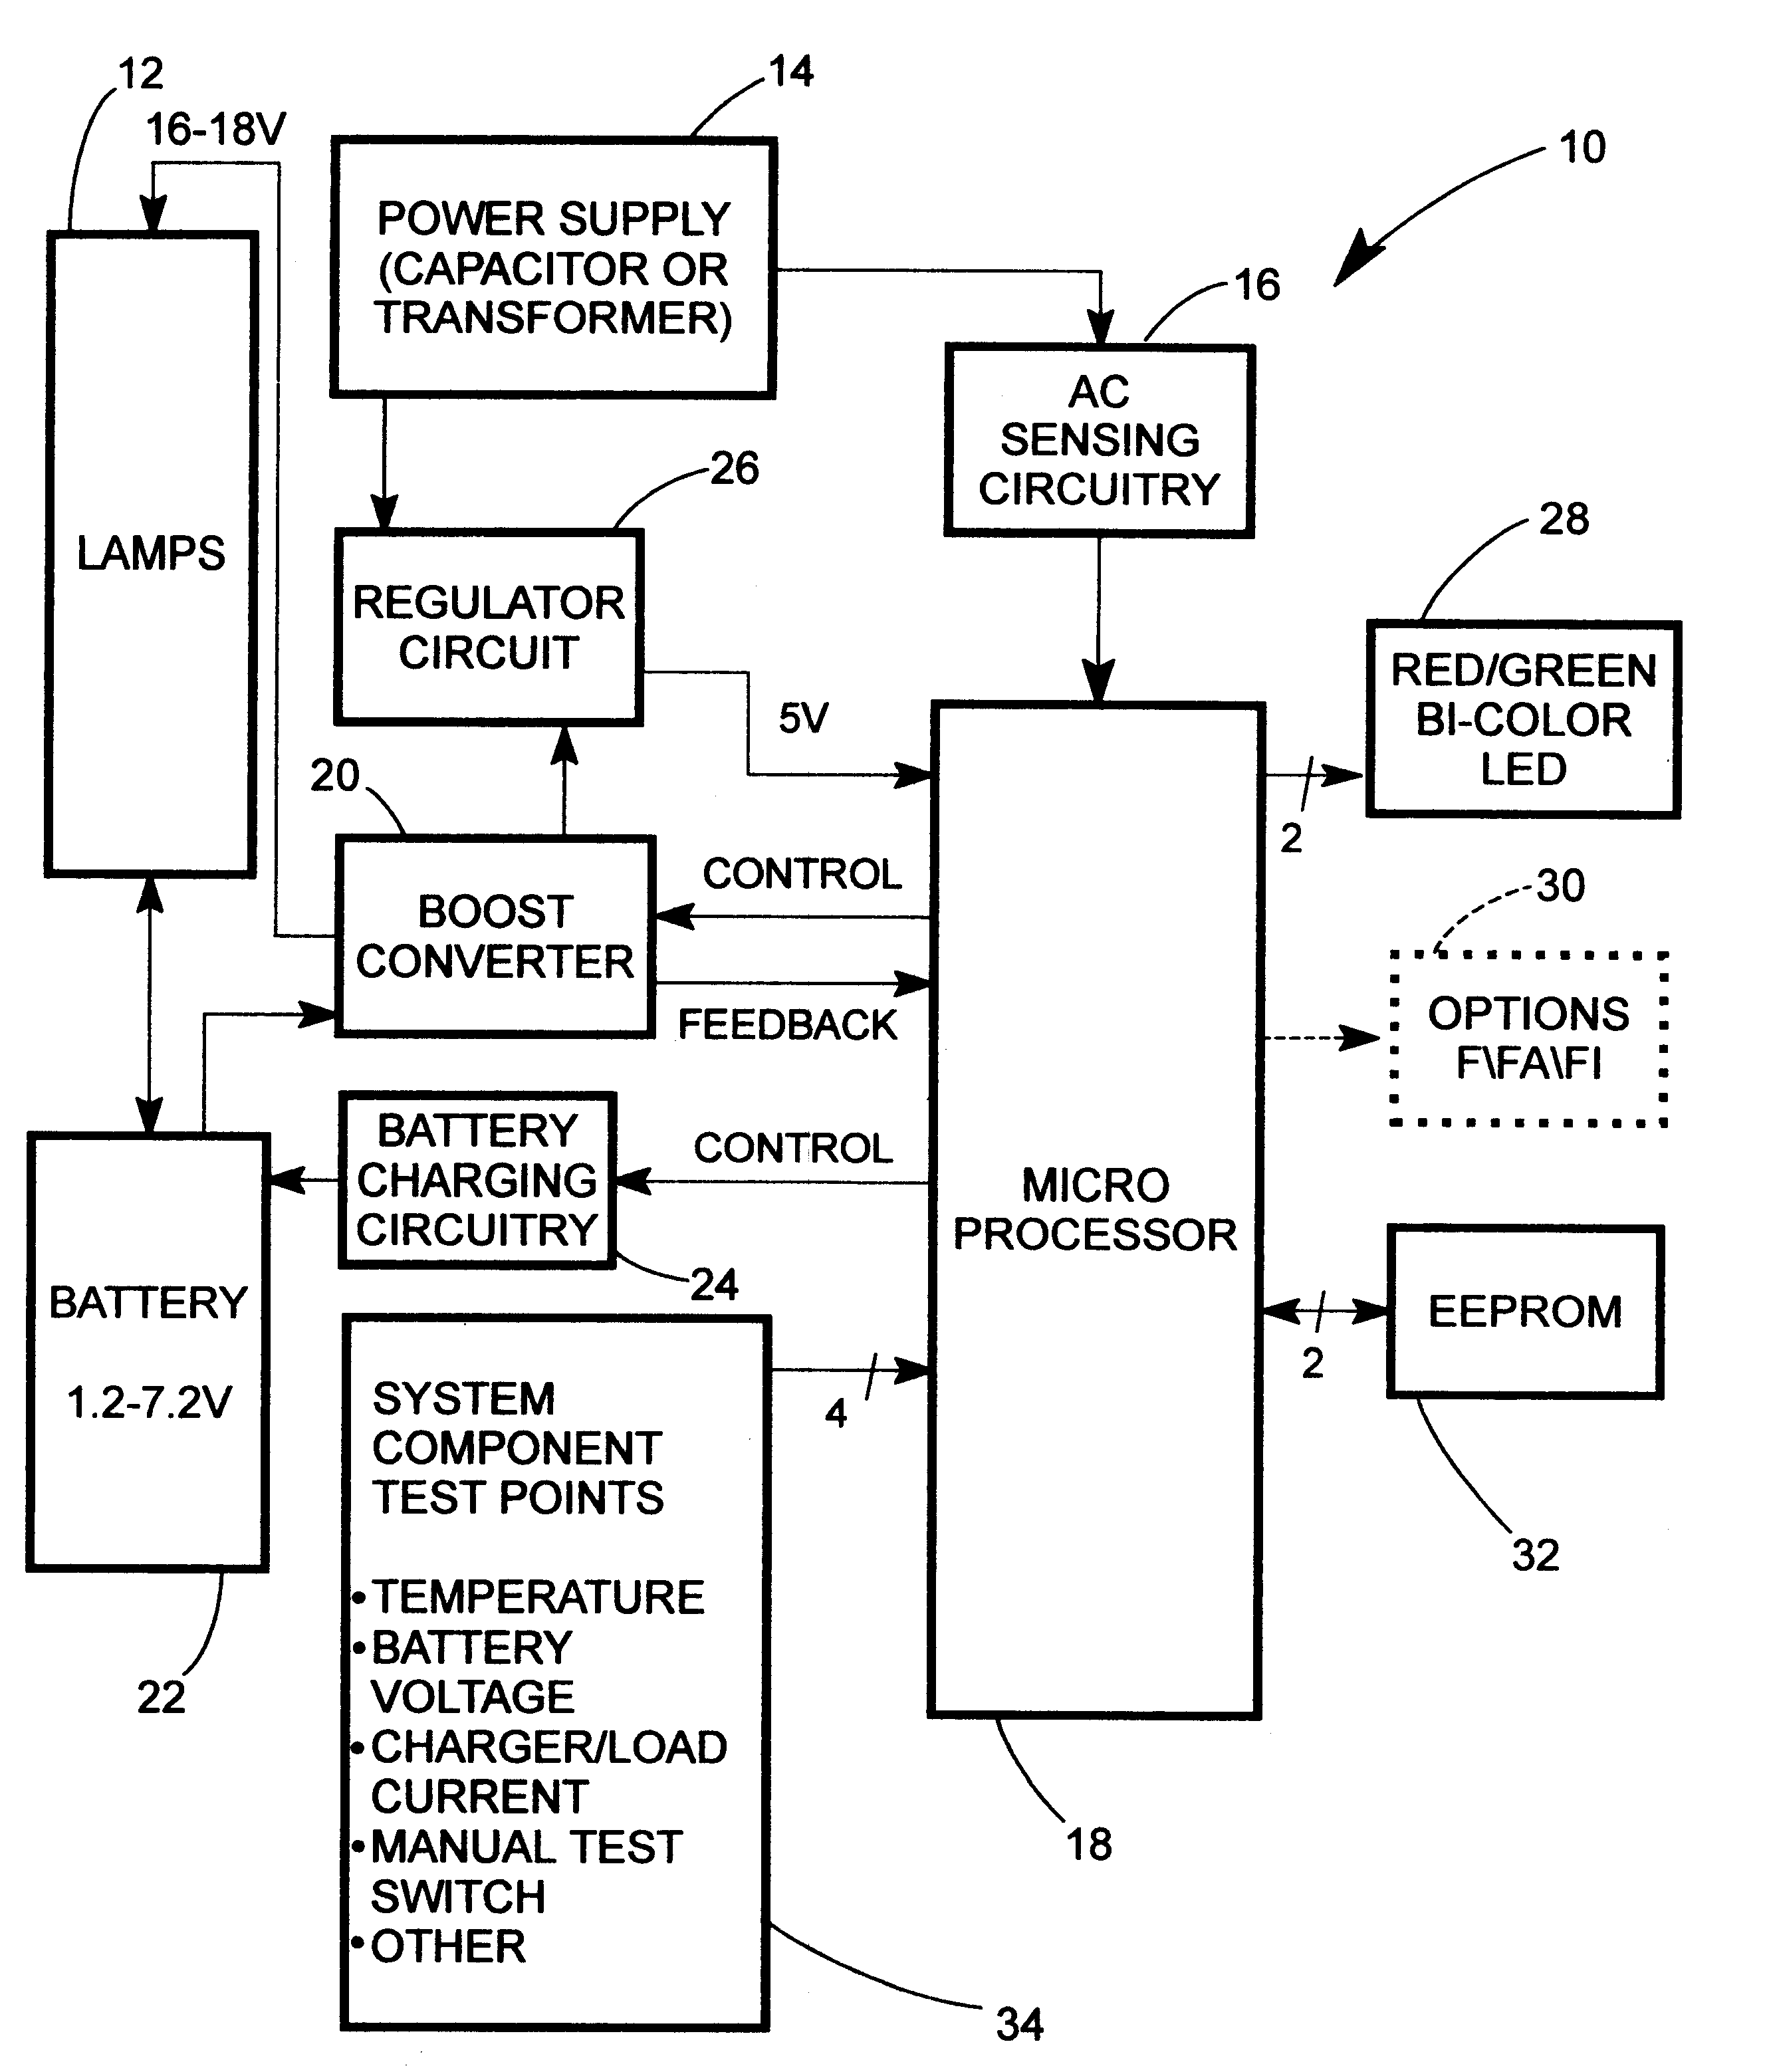 Self-diagnostic circuitry for emergency lighting fixtures